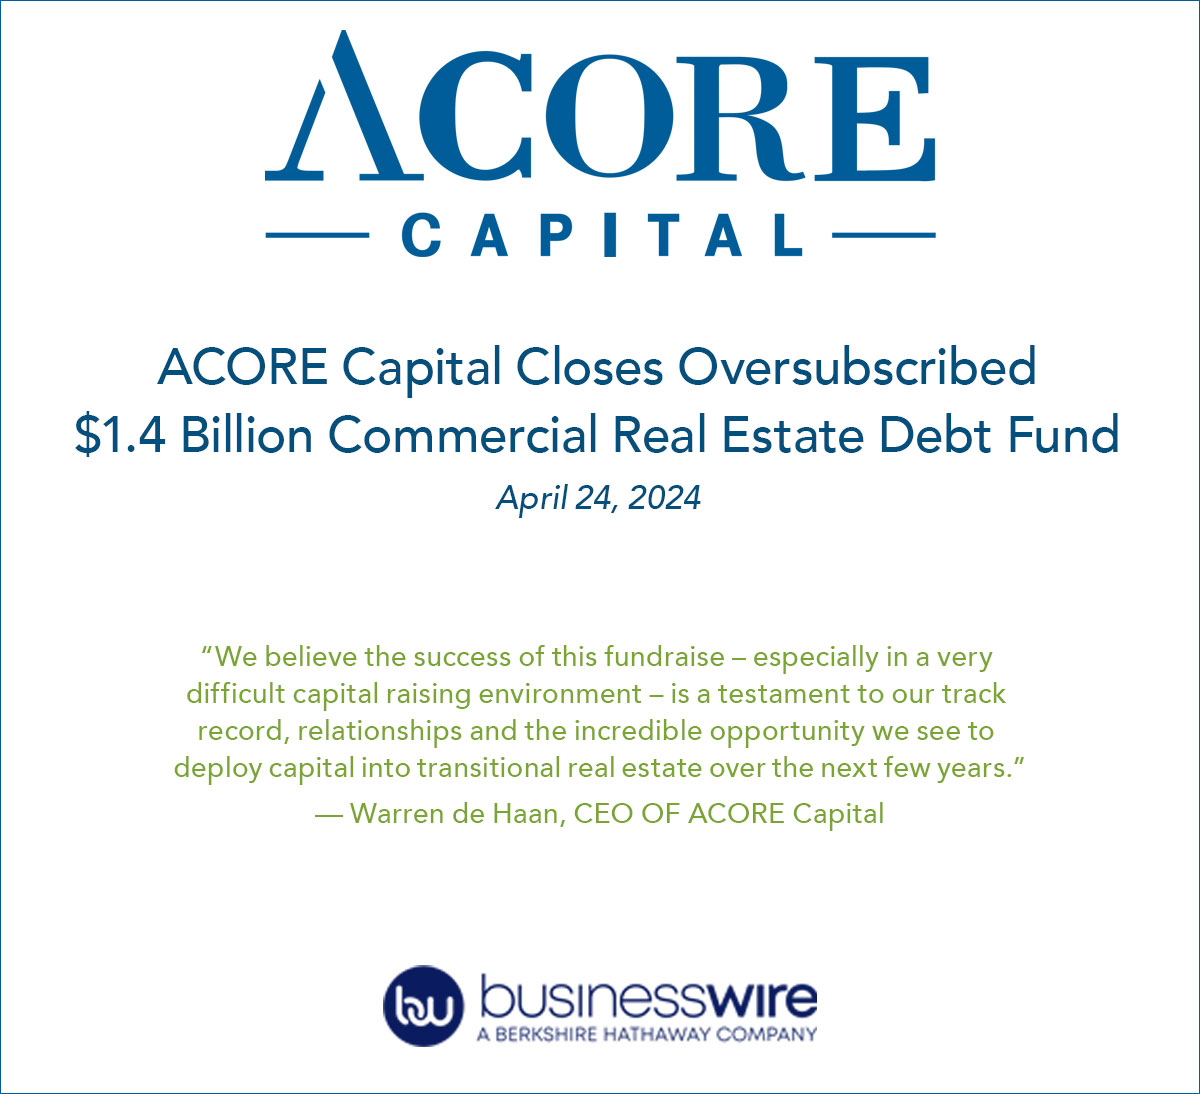 ACORE Capital Closes Oversubscribed $1.4 Billion Commercial Real Estate Debt Fund